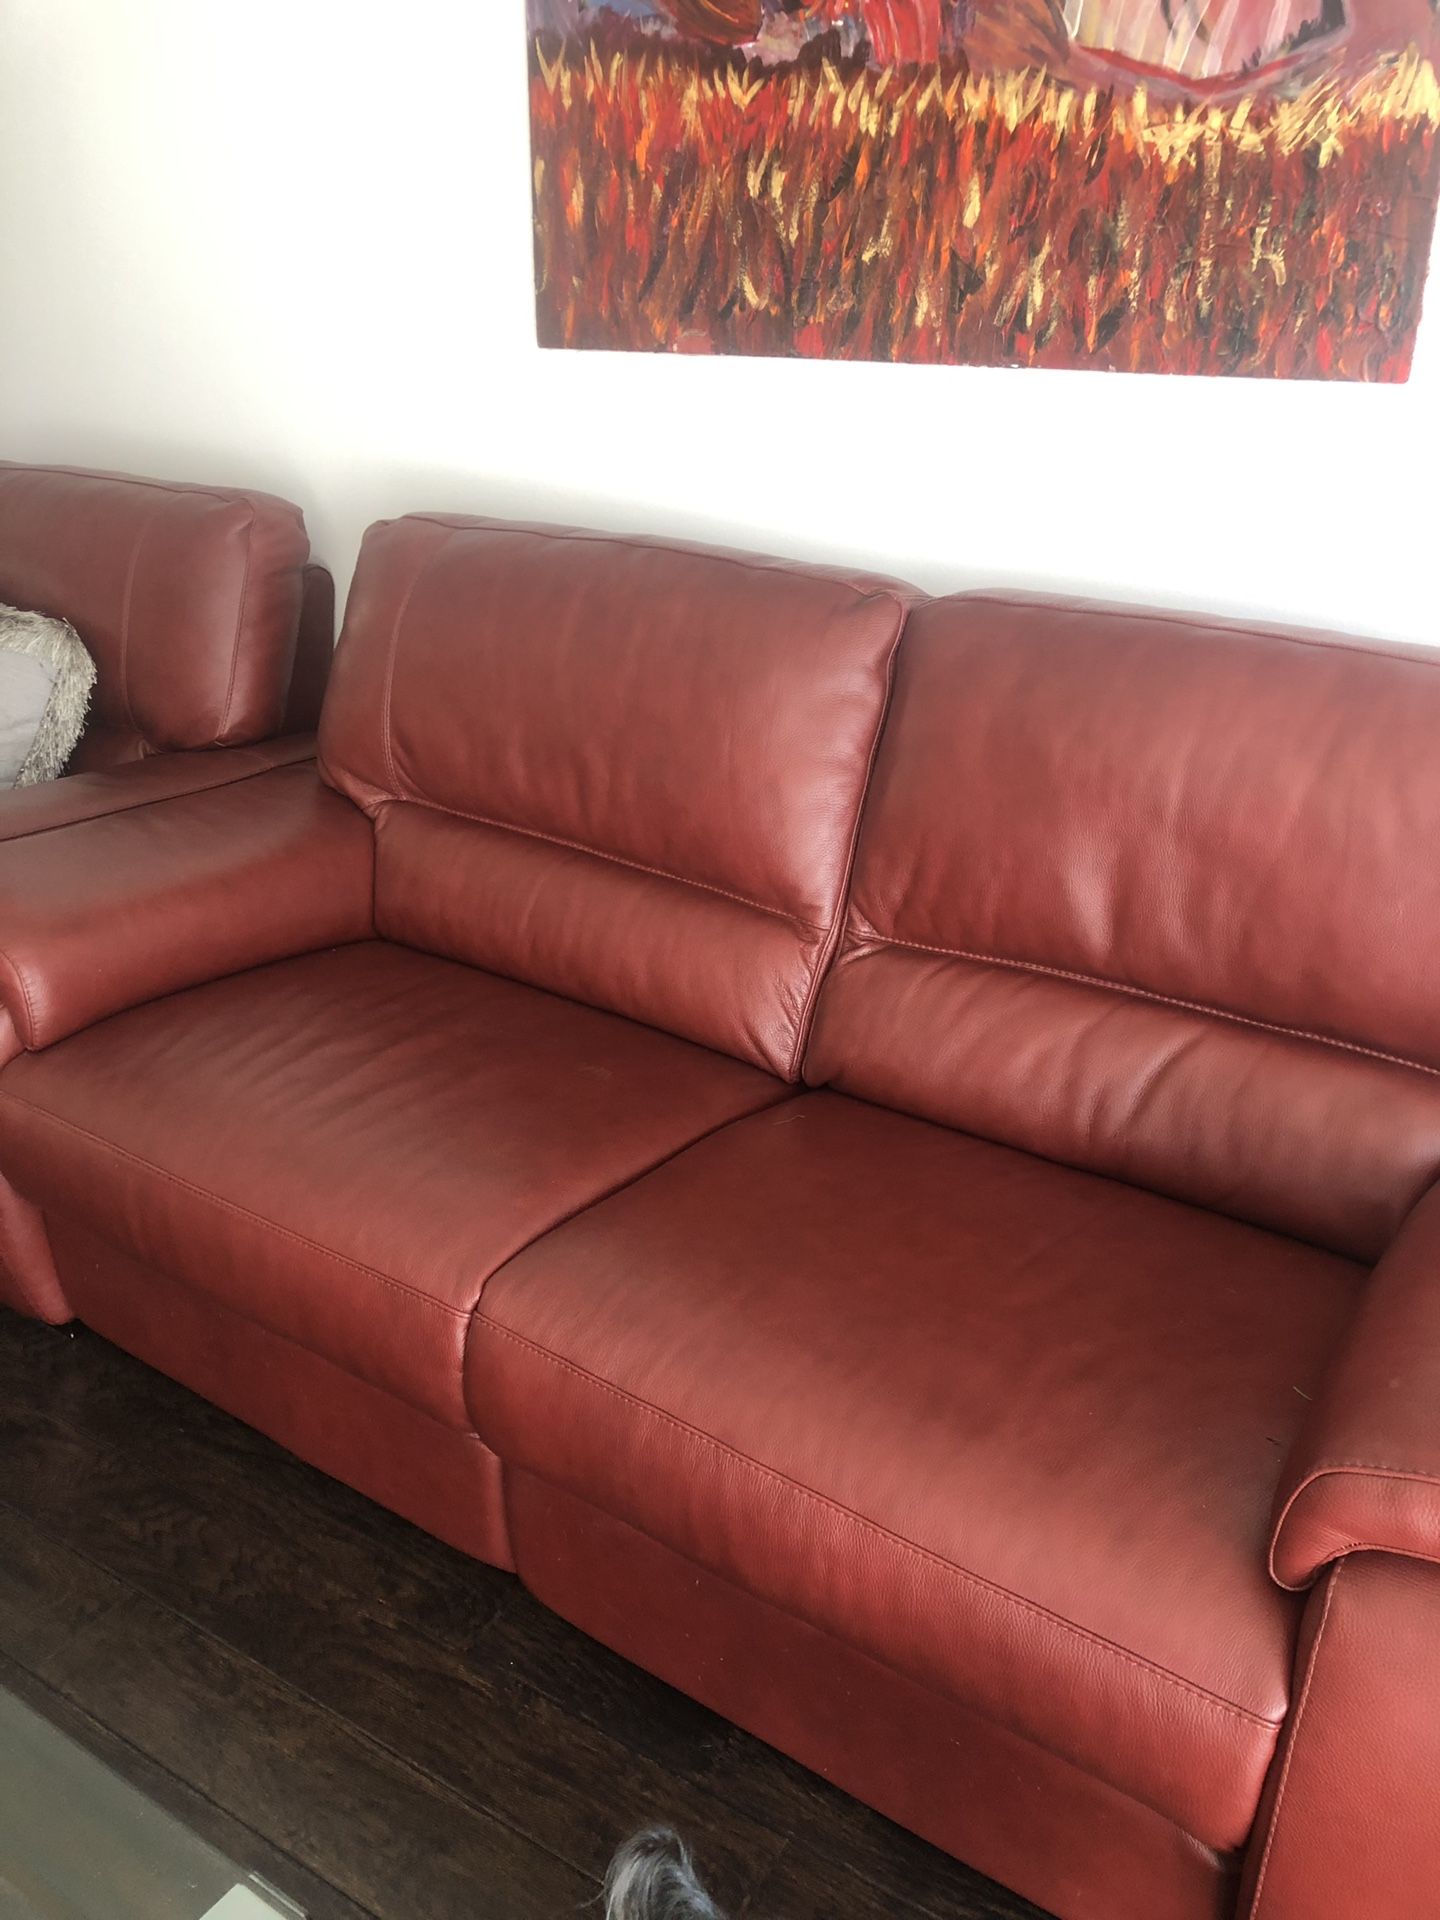 Italian Leather Power Recliners Sofa and power recliner Chair.